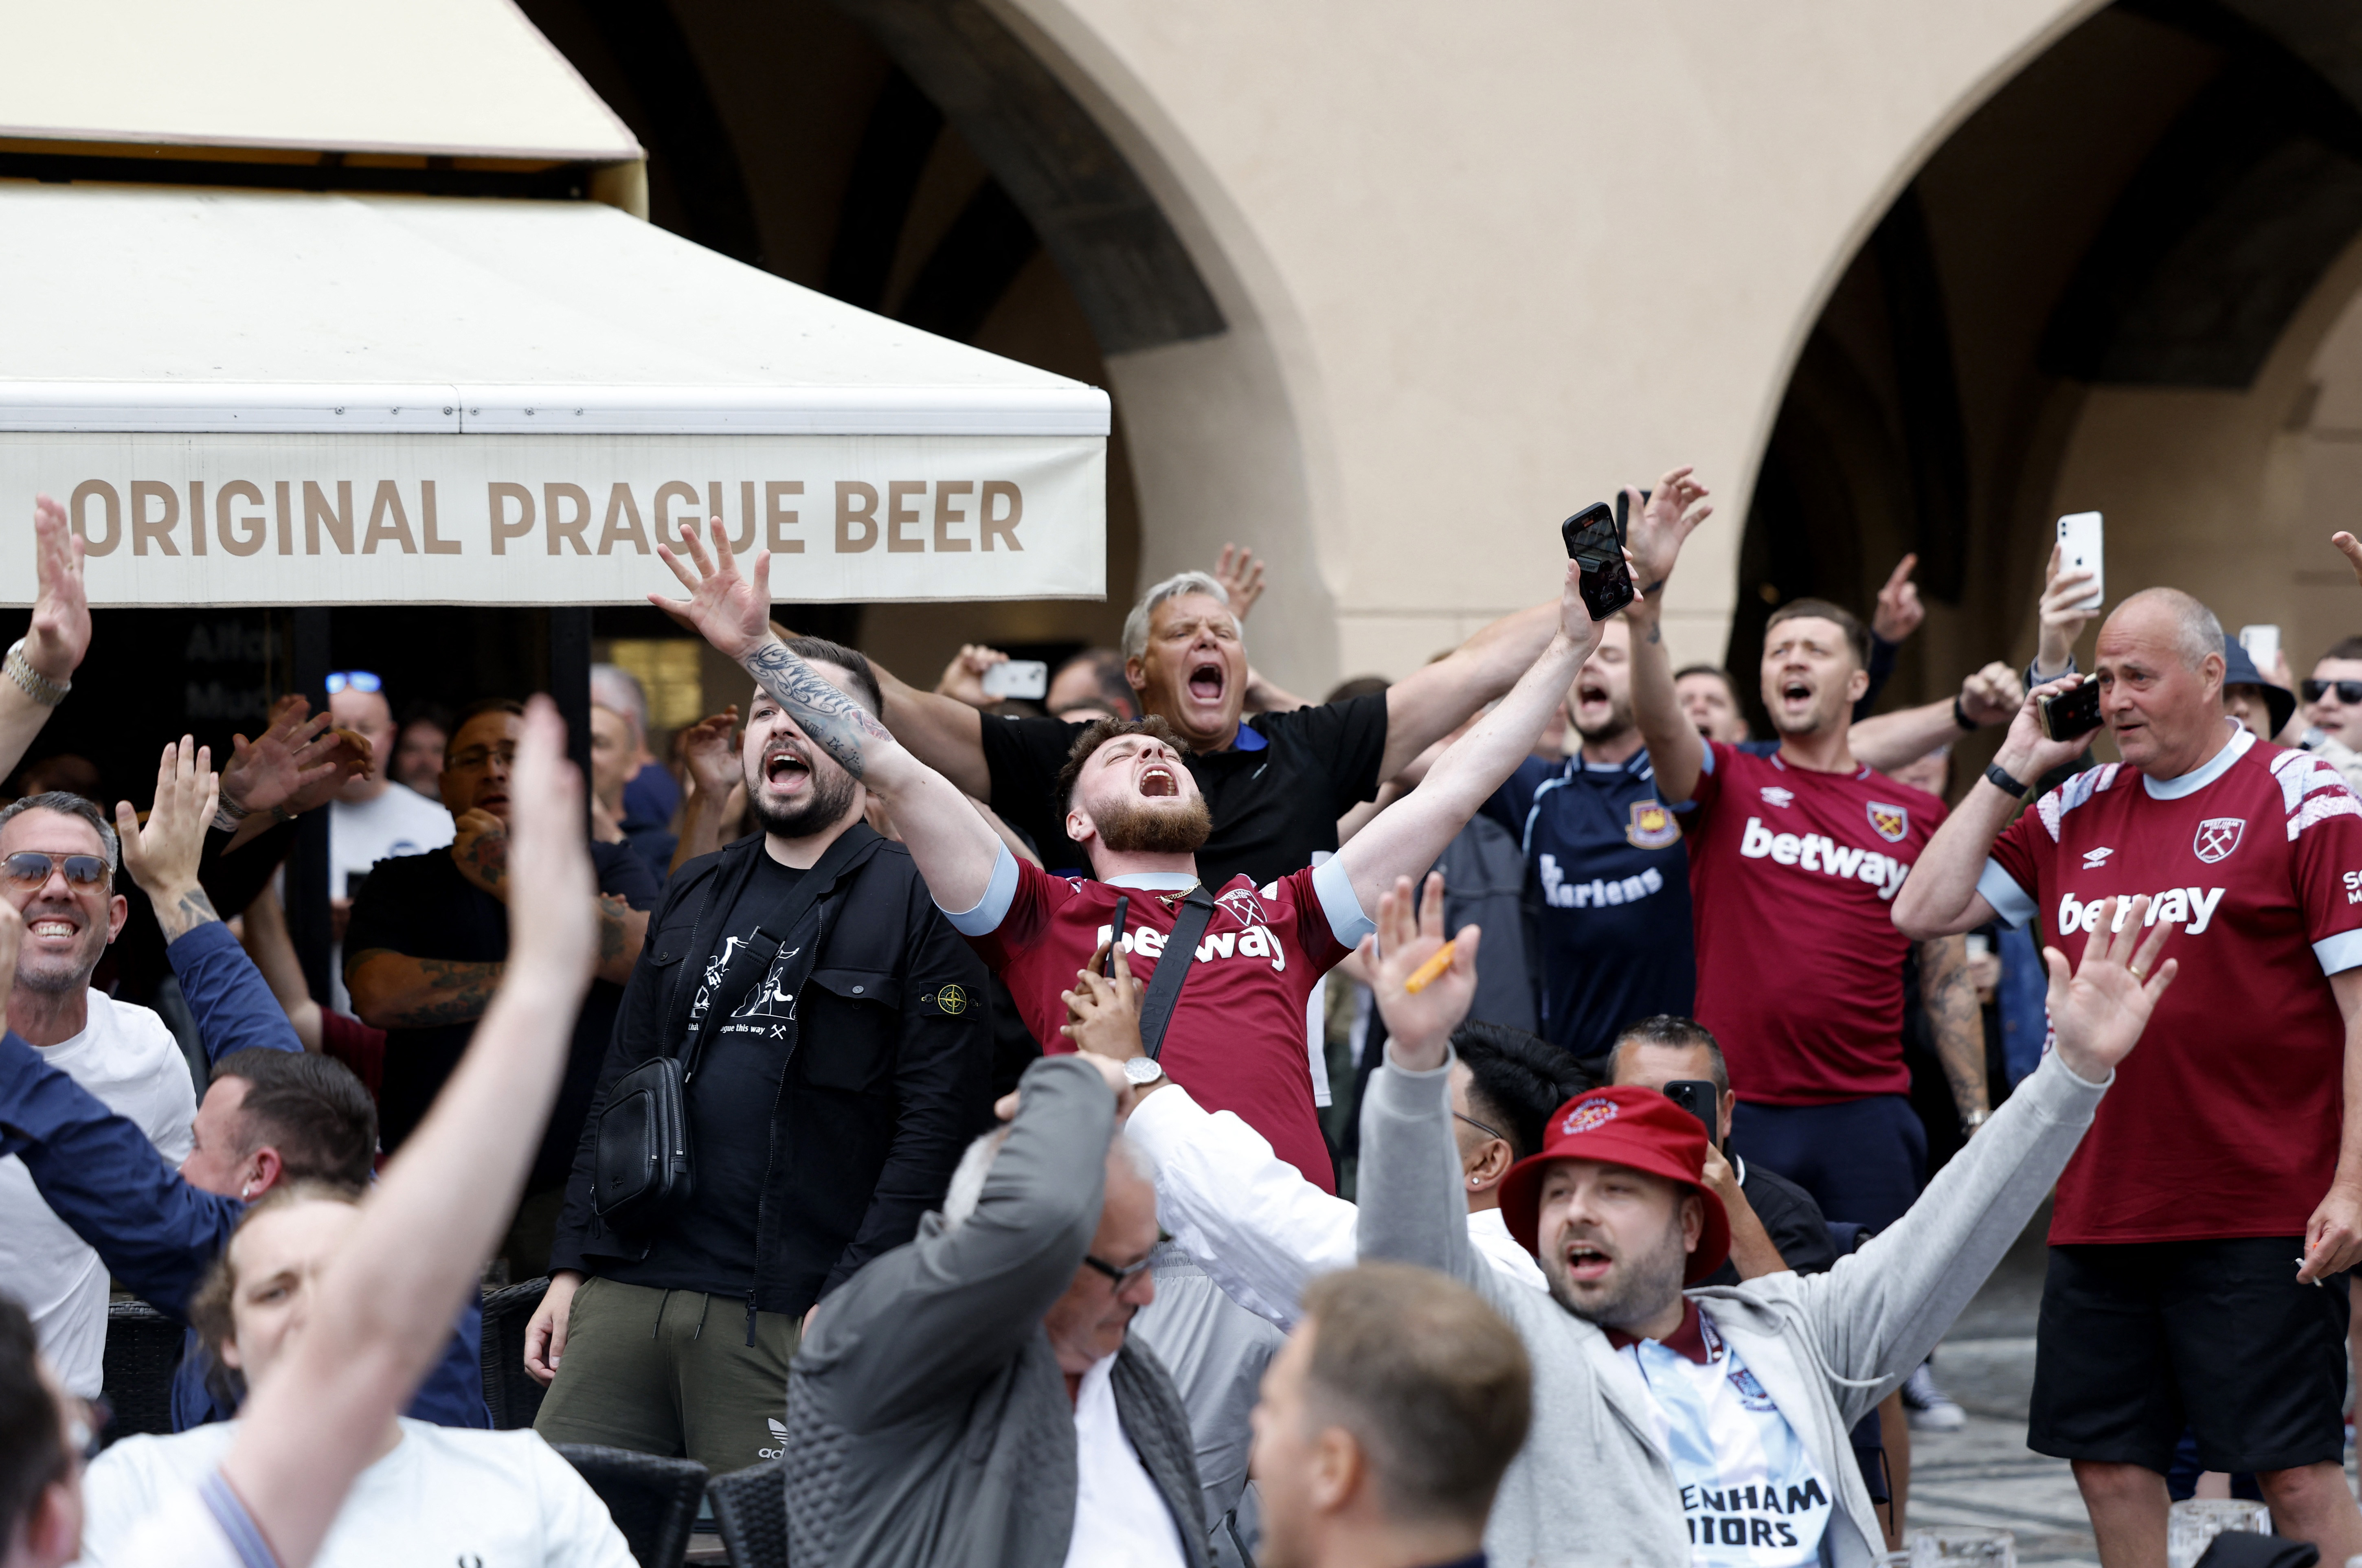 Europa Conference League - Fans gather in Prague ahead of the Europa Conference League Final